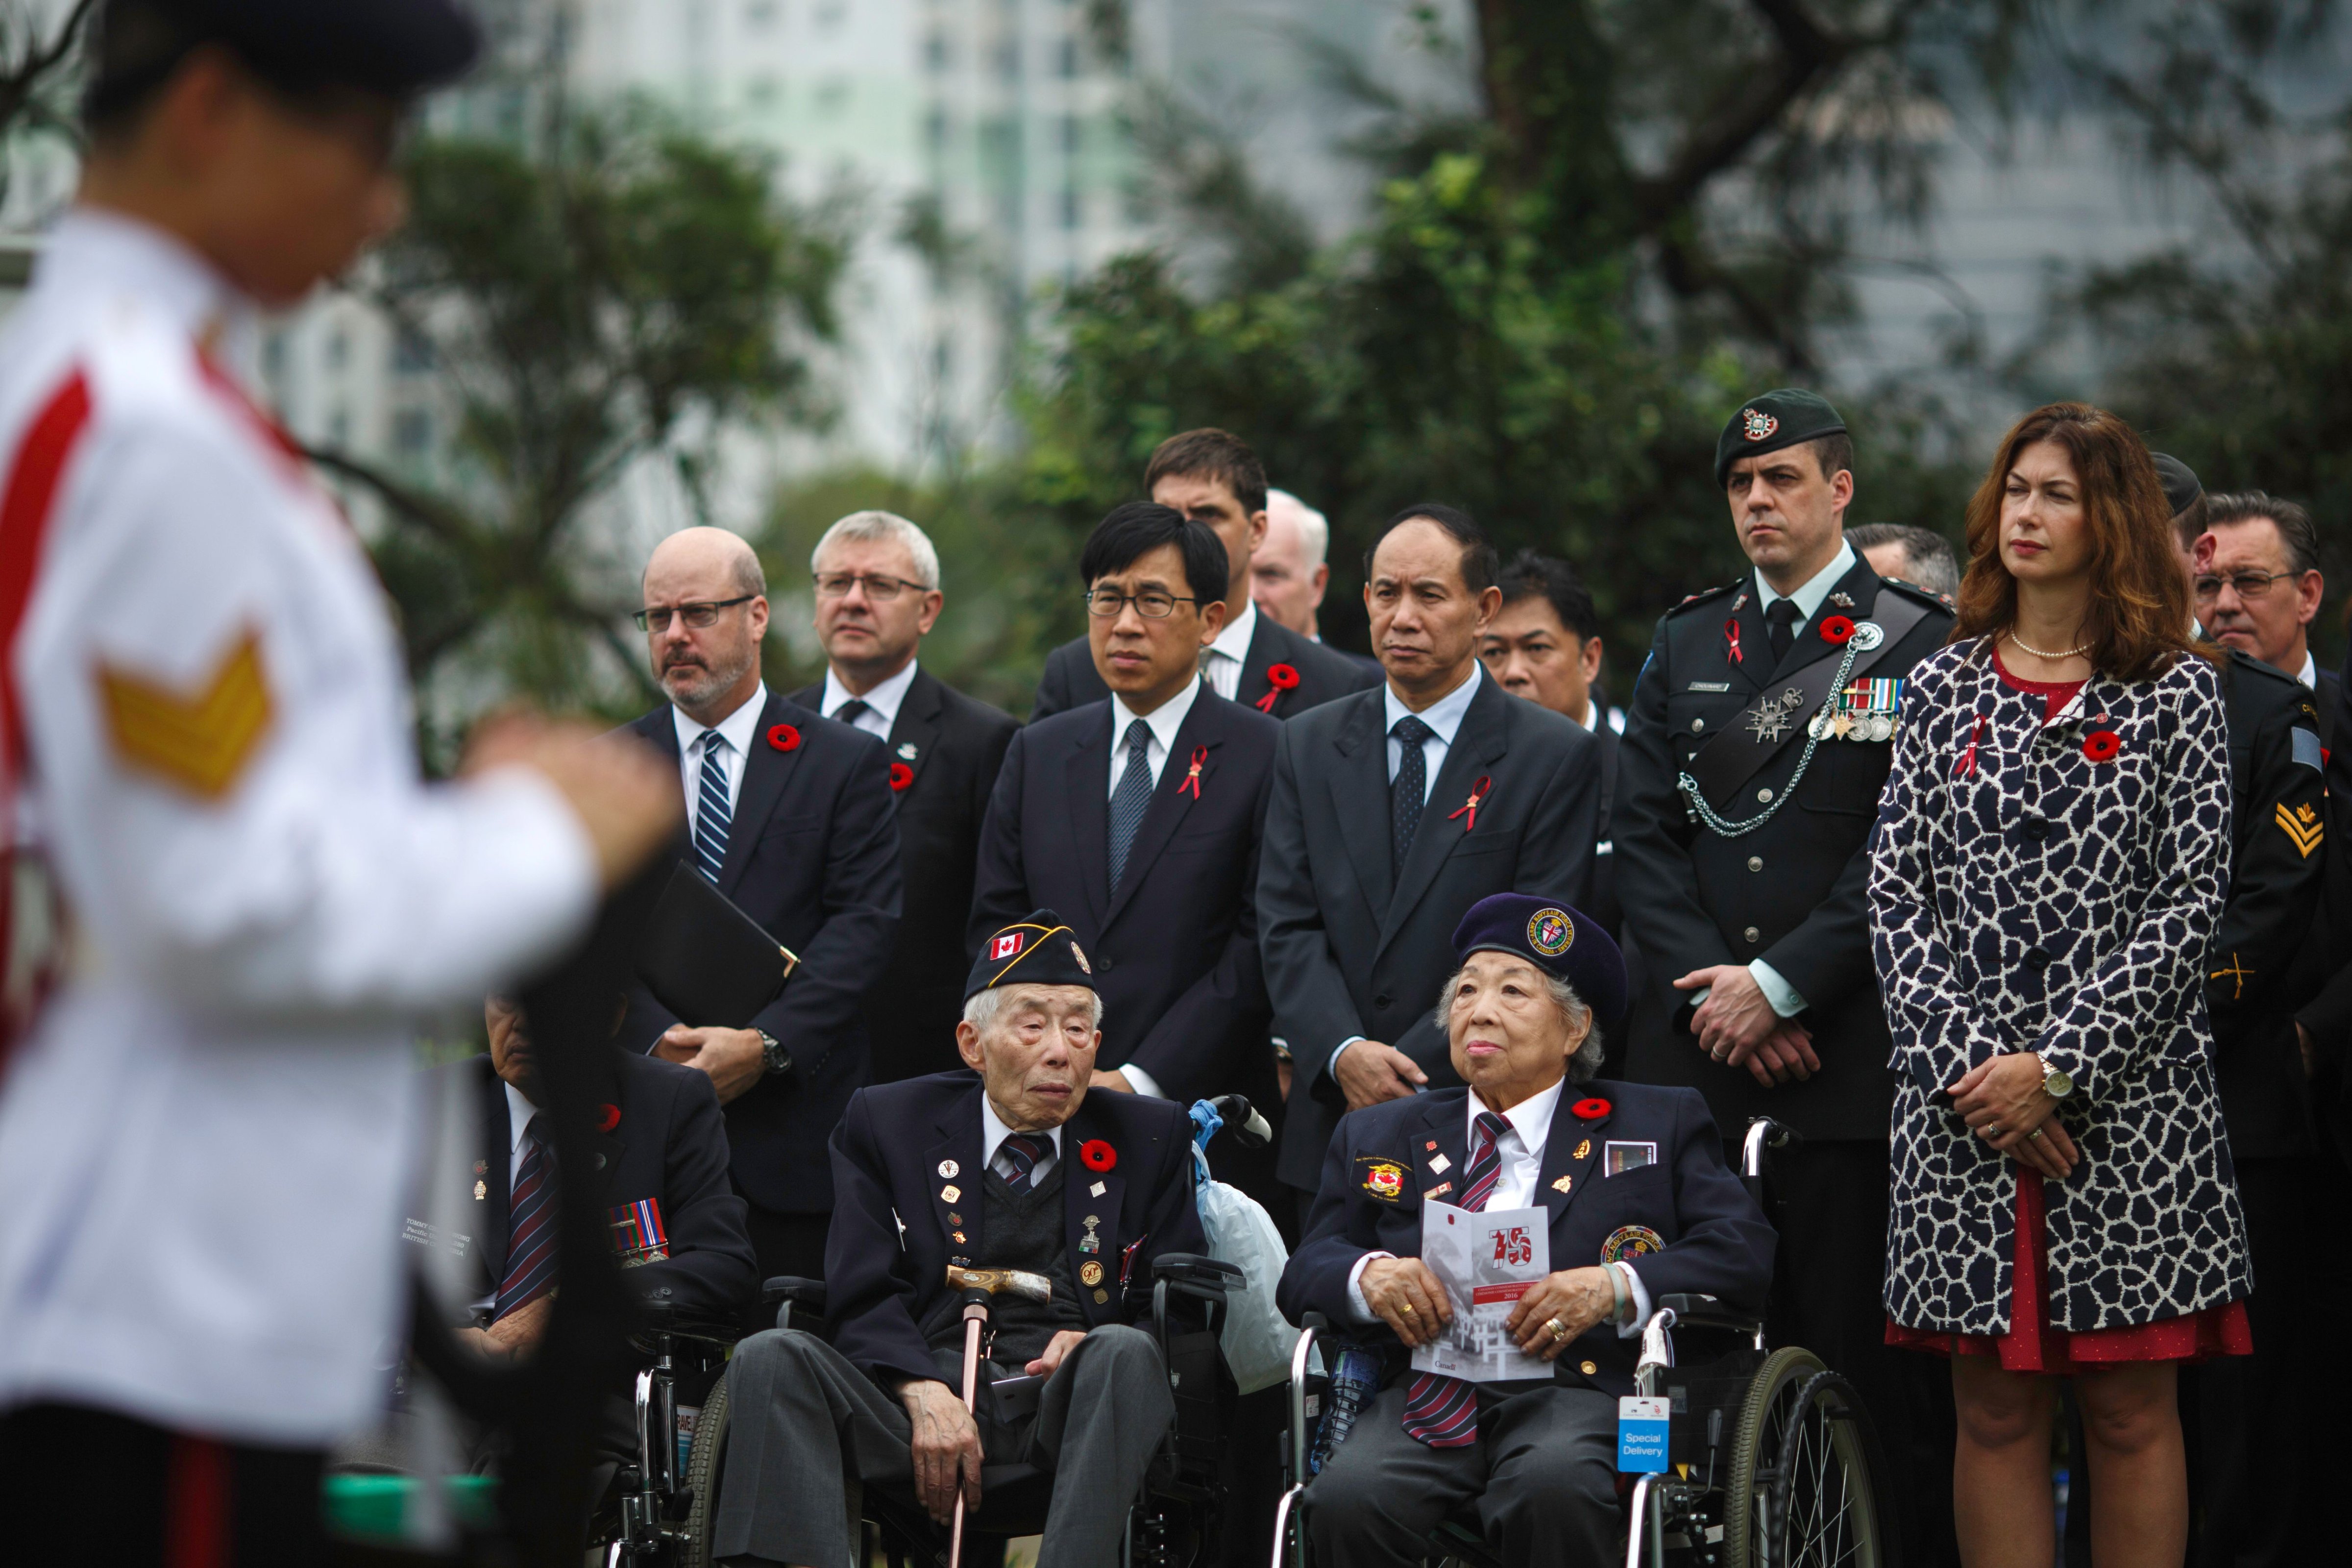 Hong Kong World War II veterans, front row, and attendees, including relatives of World War II veterans, attend the Canadian commemorative ceremony in Hong Kong's Sai Wan War Cemetery on Dec. 4, 2016, honoring those who died during the Battle of Hong Kong and World War II (Tengku Bahar—AFP/Getty Images)